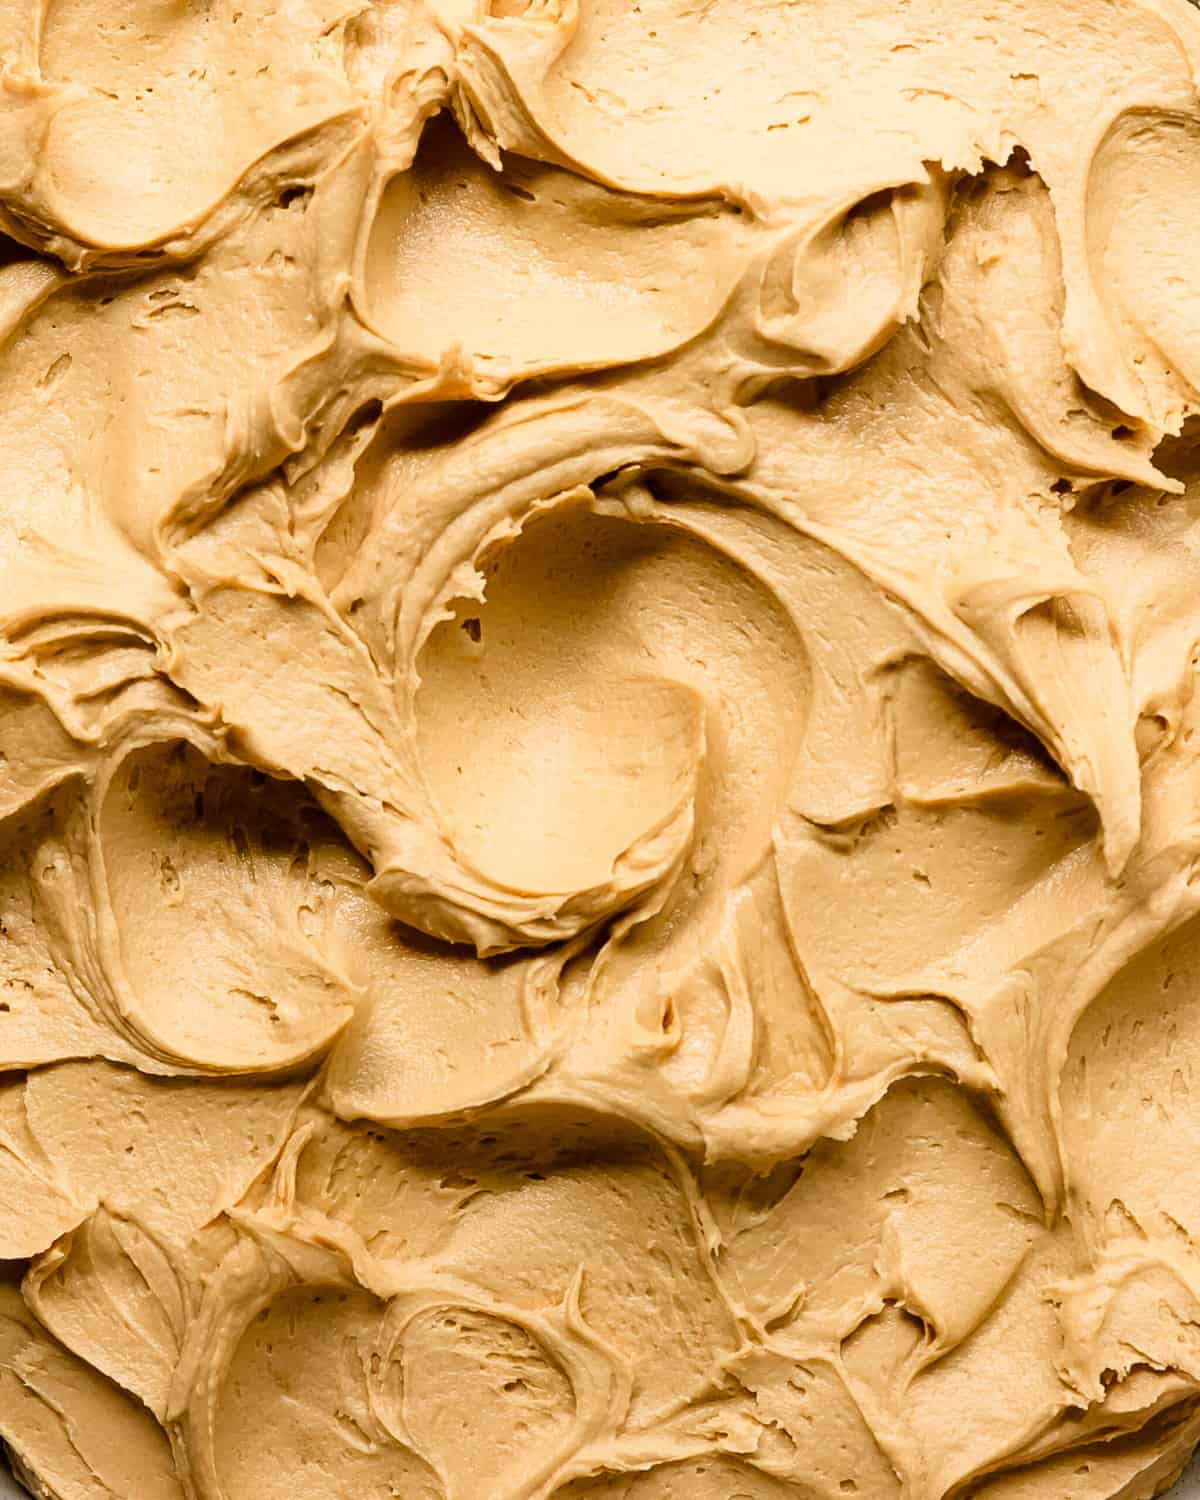 Coffee buttercream is a rich, sweet and creamy coffee flavored frosting that’s perfect for cakes, cupcakes or just to enjoy by the spoonful. Make this easy coffee frosting in about 5 minutes or less using 5 simple ingredients. 